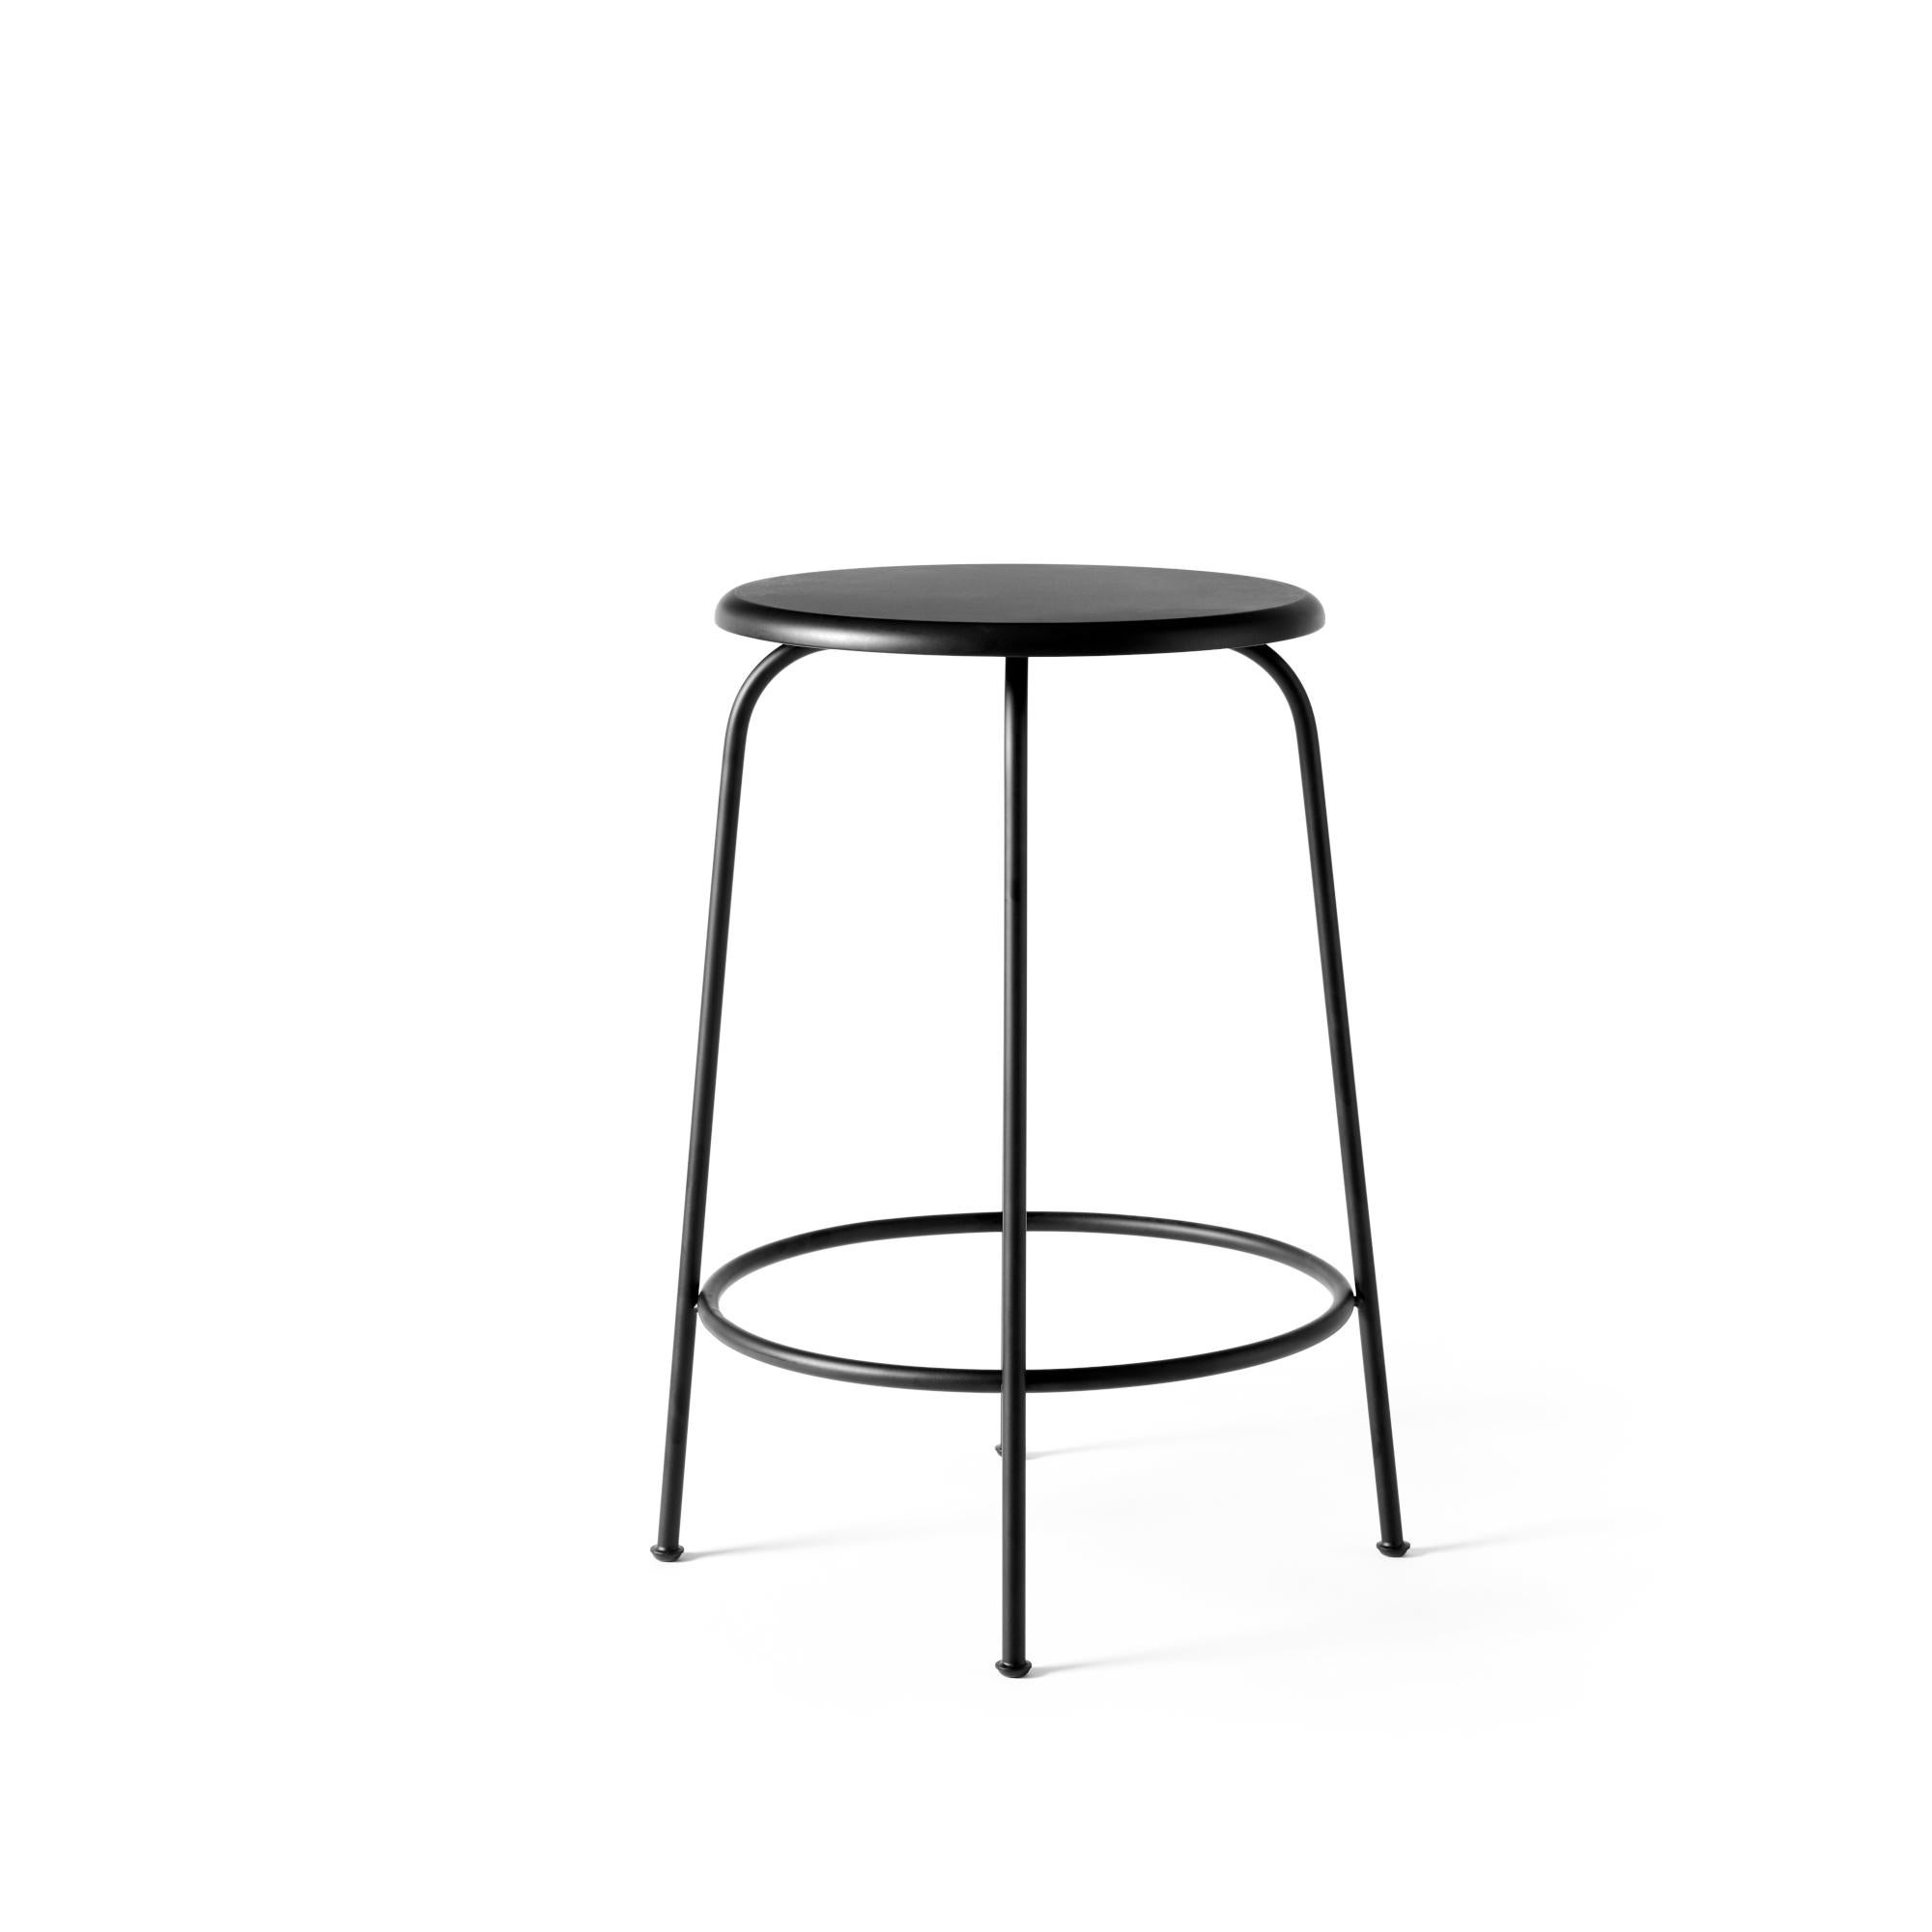 A study of unity between functionalism and minimalism, the Afteroom stool is the ultimate expression of the Bauhaus-inspired Afteroom series. It is a stool cut back to the absolute necessities, yet it still operates as an integral part of an overall